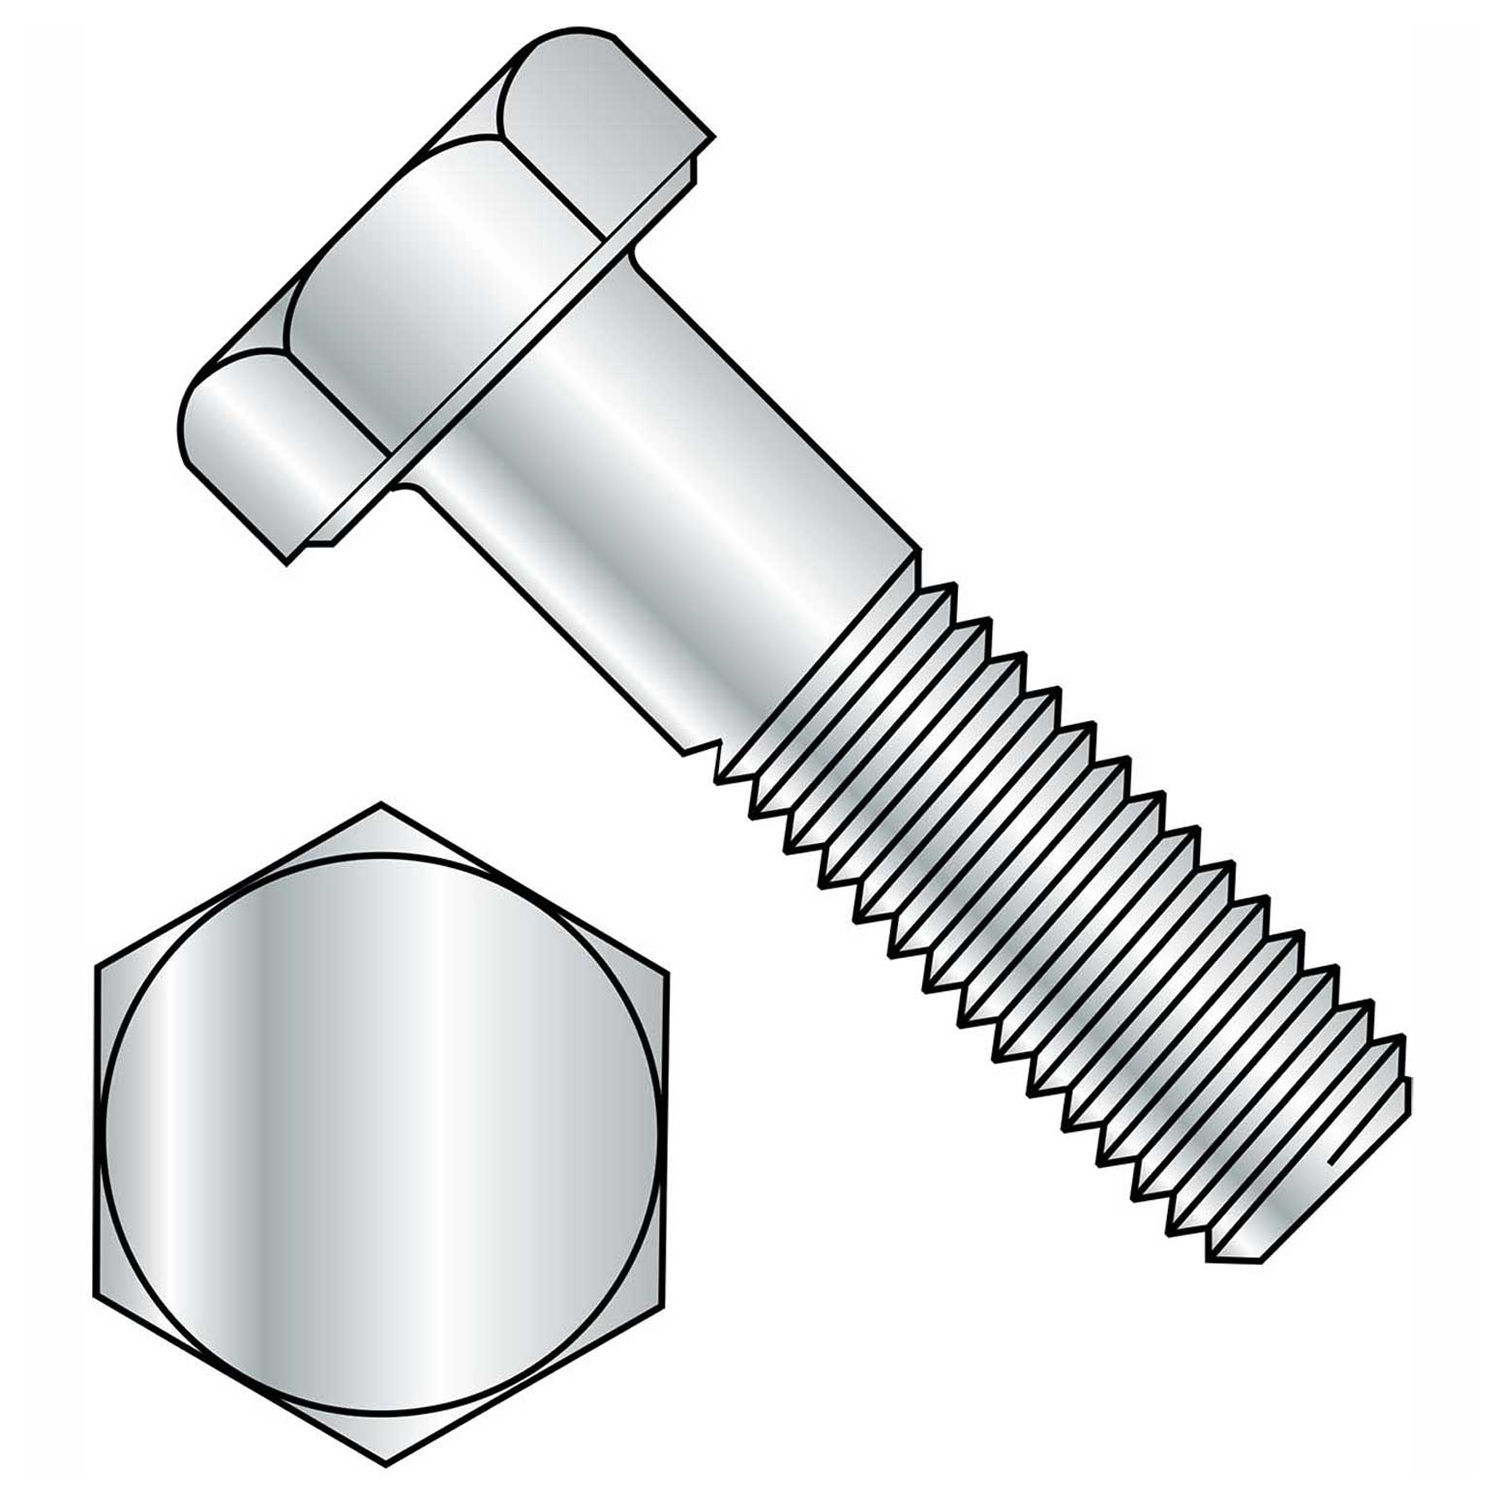 A 325M HEAVY HEX BOLT, Sinopro - Sourcing Industrial Products